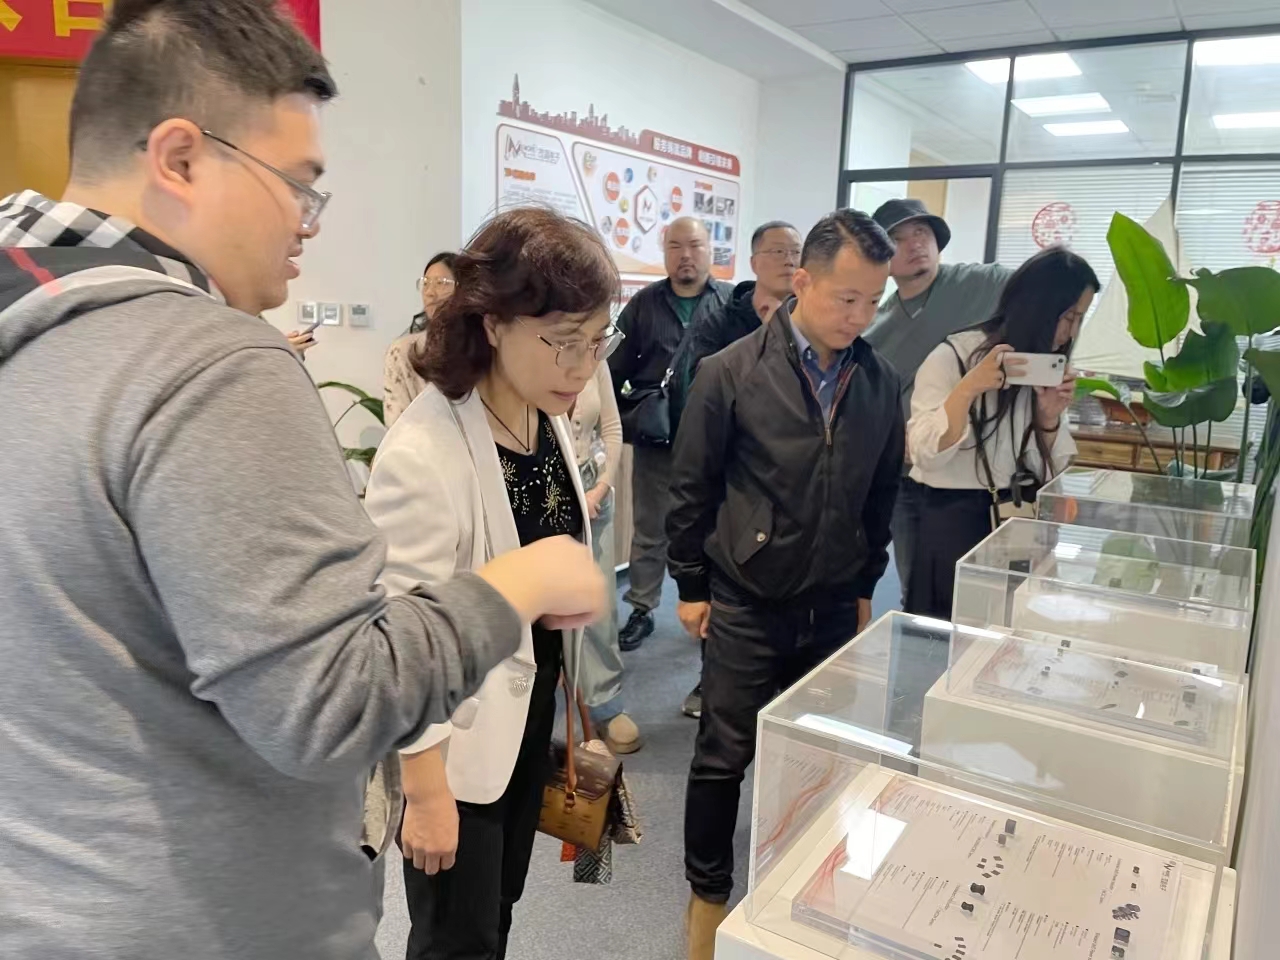 The delegation of Taicang High tech Zone Science and Technology Innovation Carrier Association visited and exchanged ideas with Suzhou Maochang Electronics